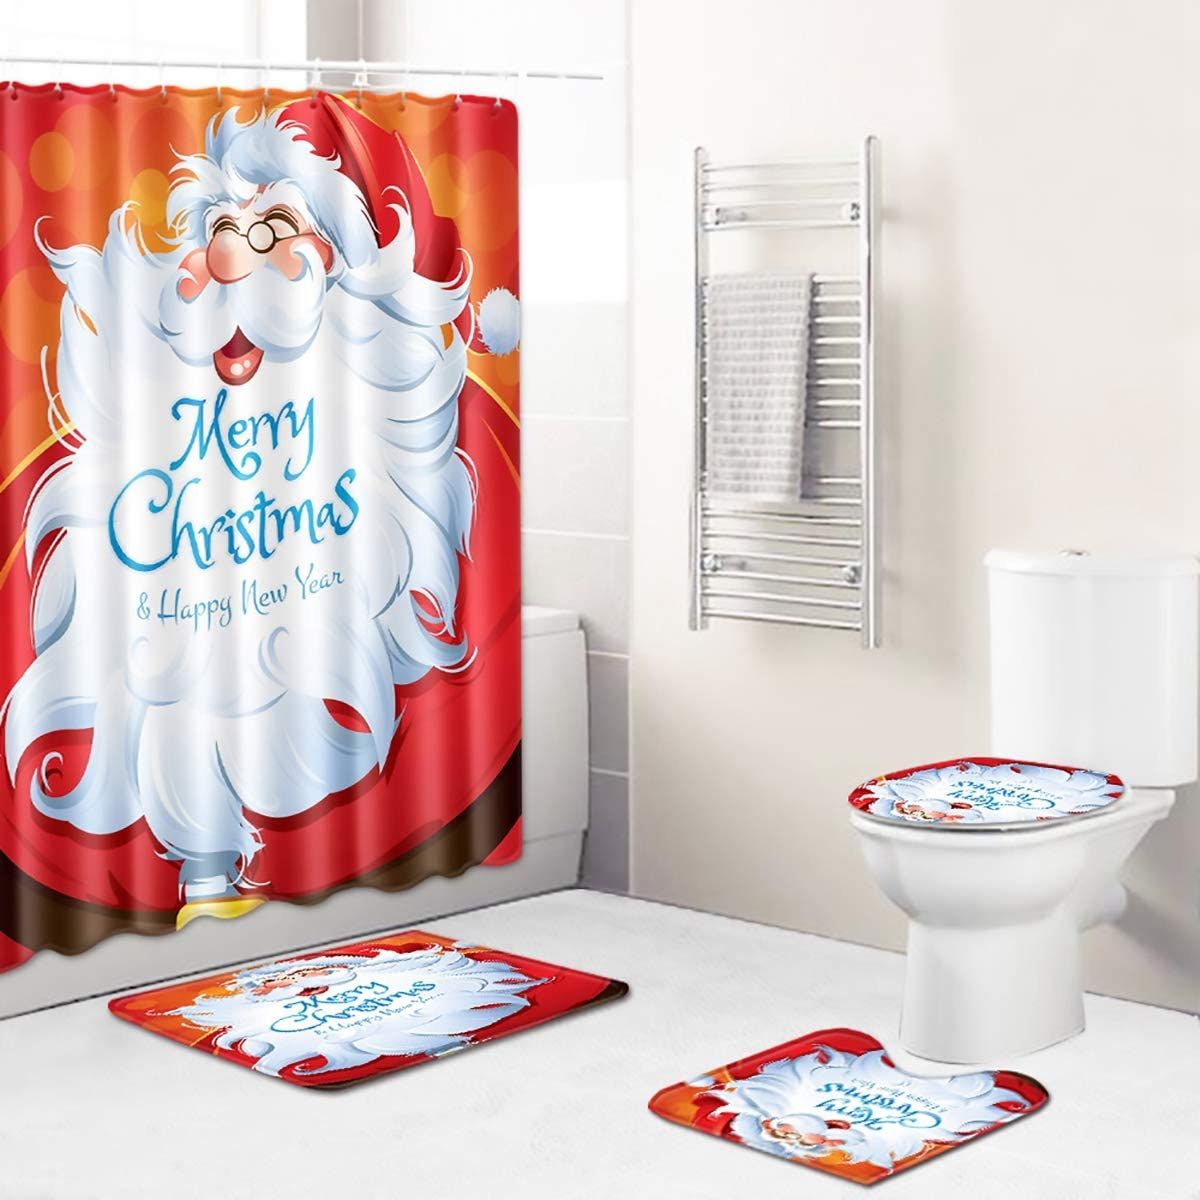 4pcs Set, A23 Toilet Lid Cover and Bath Mat Santa Shower Curtain with 12 Hooks for Christmas Decoration Valcatch Merry Christmas Shower Curtain Sets,Non-Slip Rug 